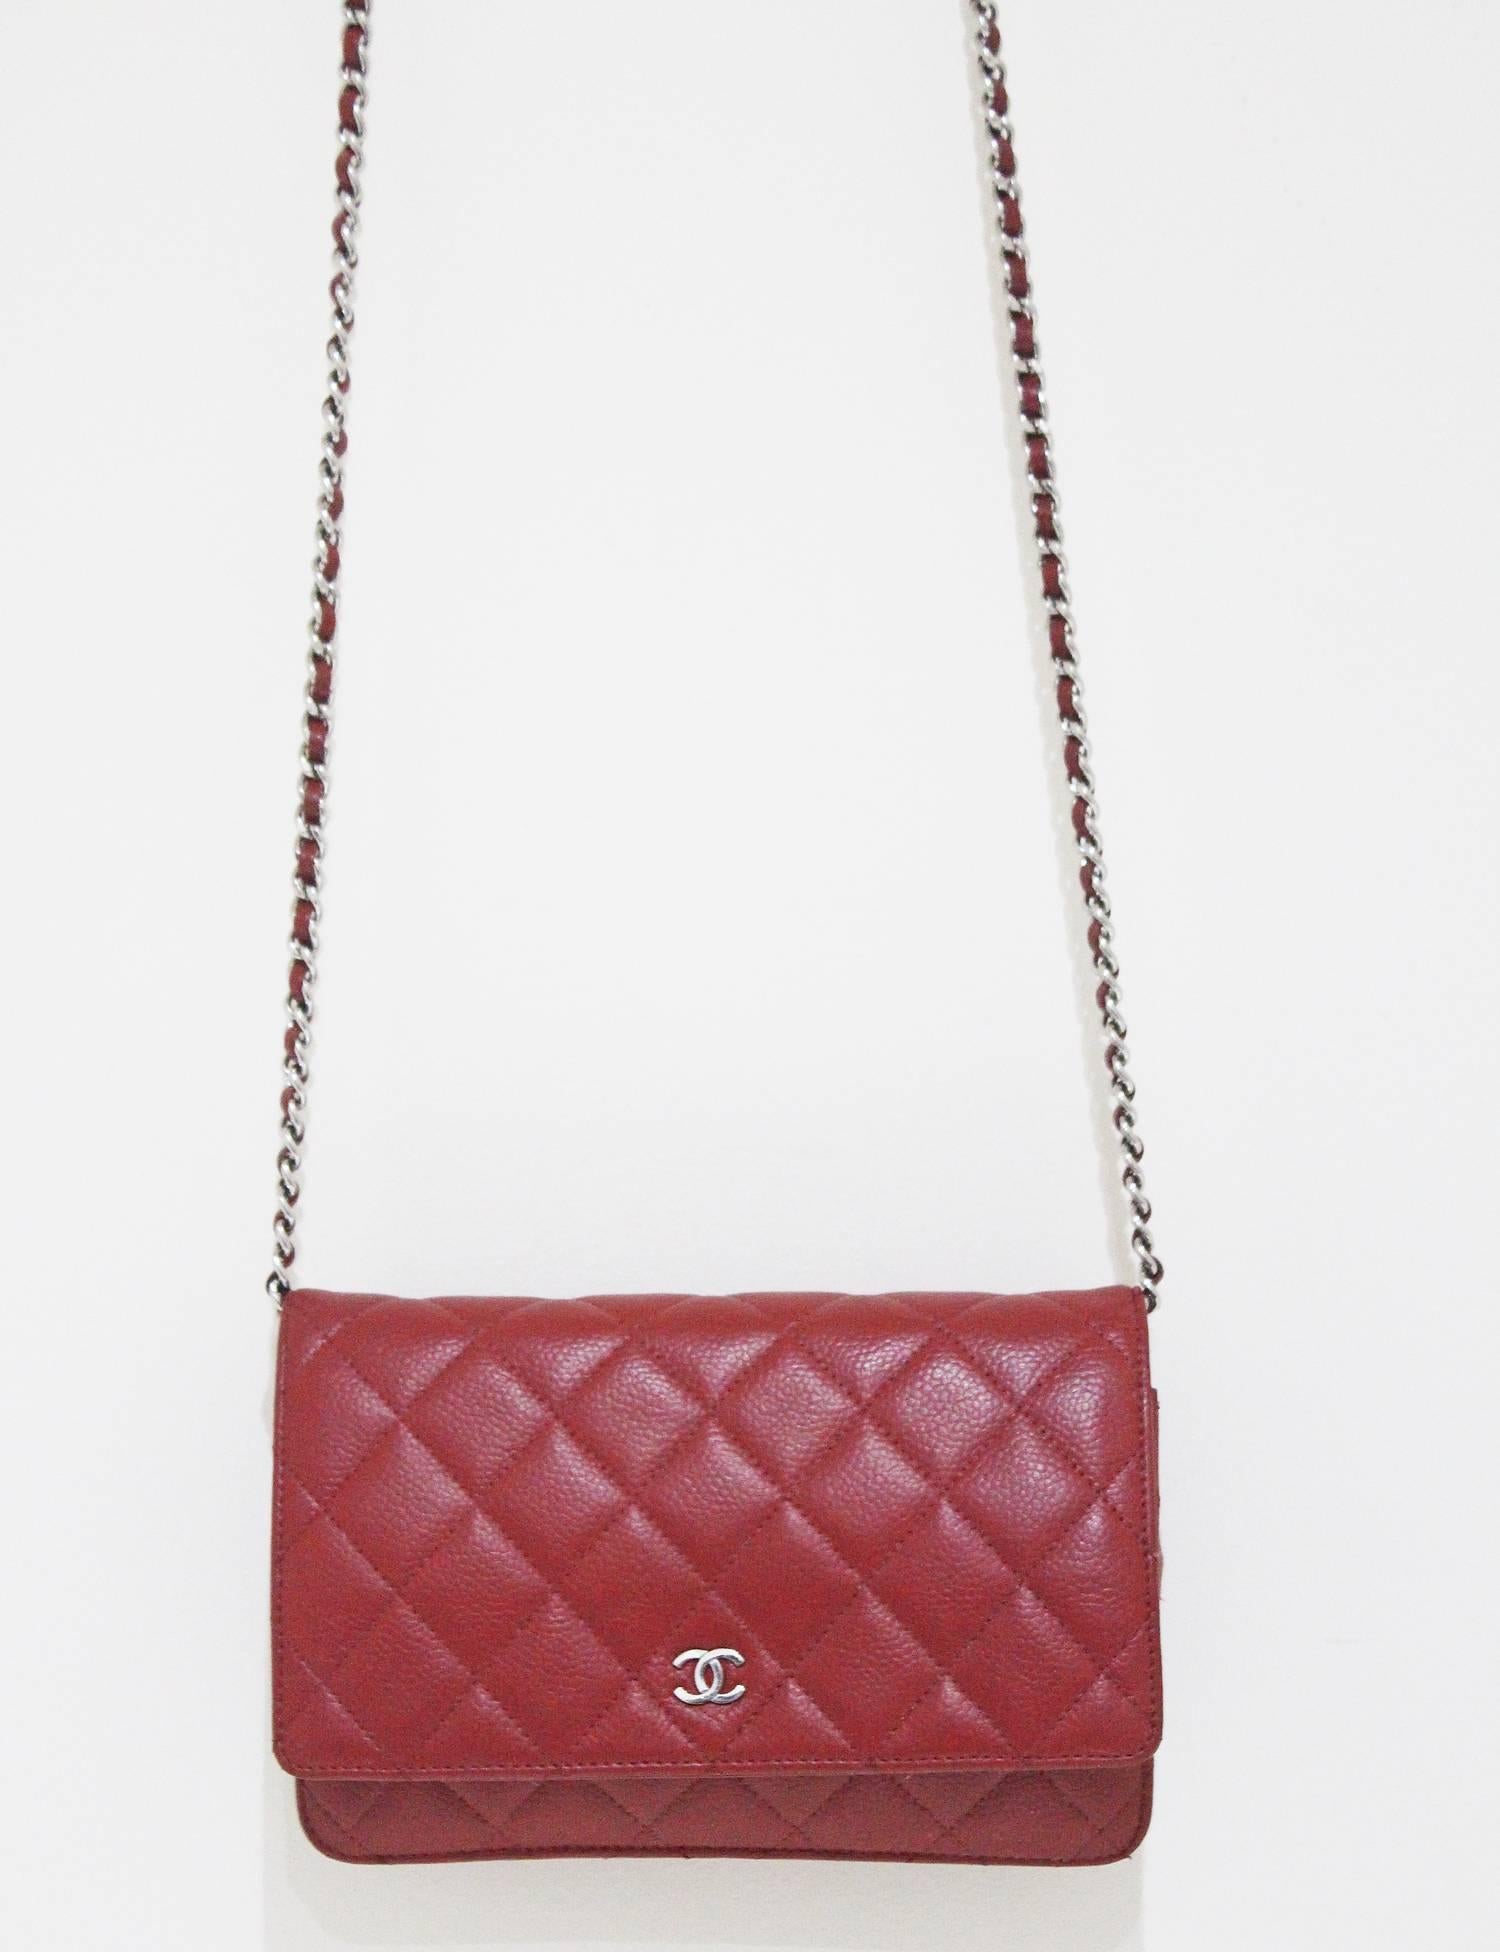 The Chanel WOC (wallet on chain) bag in red caviar leather with classic Chanel quilting. The bag features a snap button closure, silver woven chain cross body strap and open back pocket. The interior is lined in red caviar leather and red fabric.